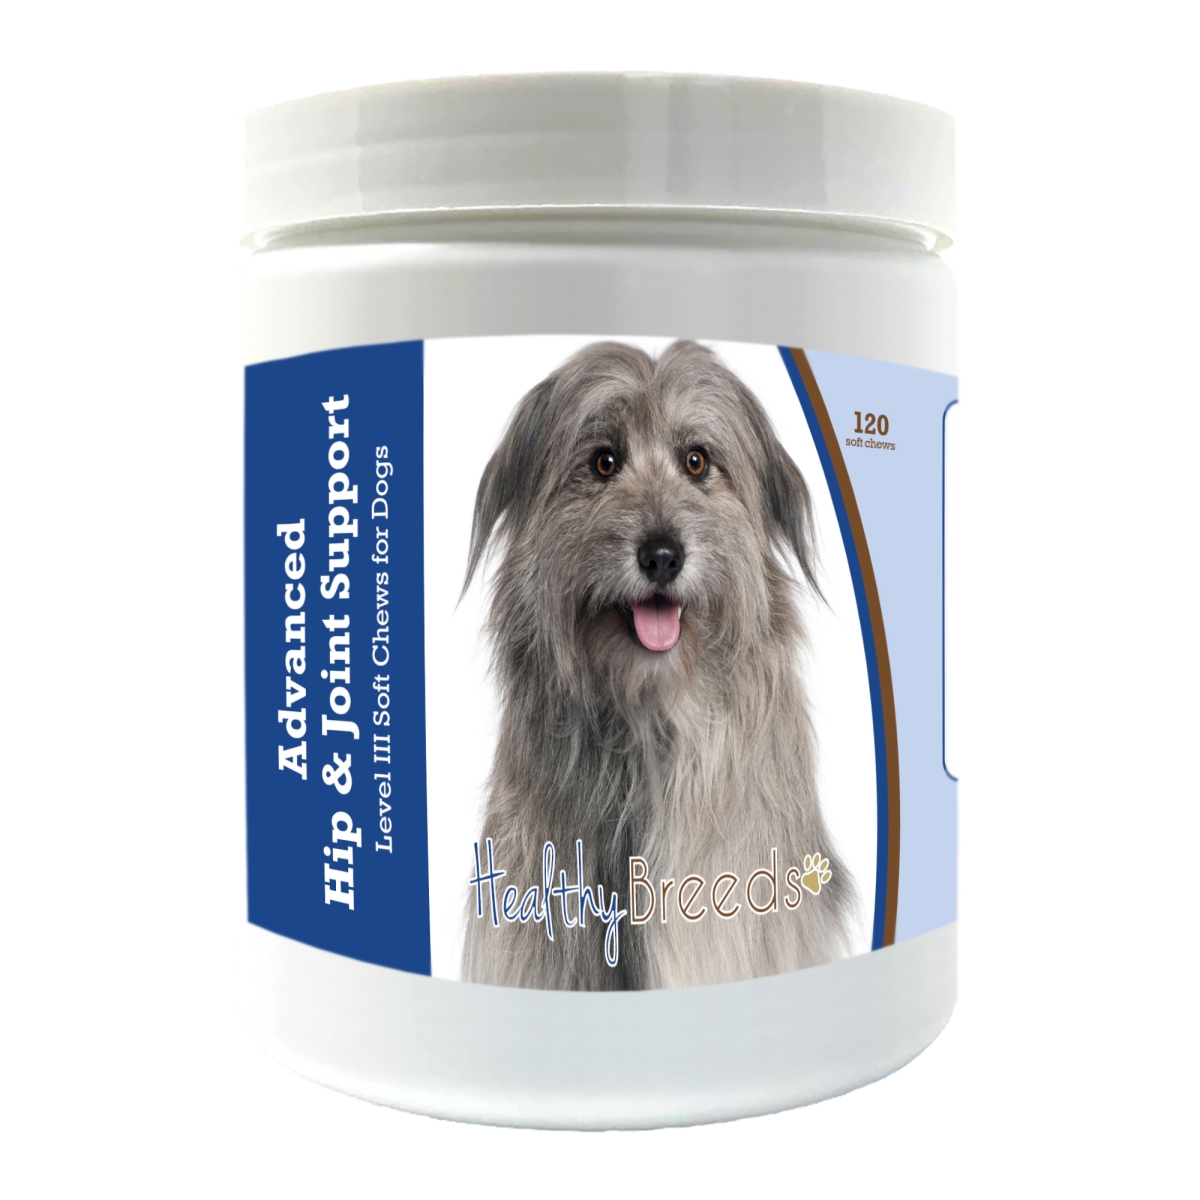 Picture of Healthy Breeds 192959899078 Pyrenean Shepherd Advanced Hip & Joint Support Level III Soft Chews for Dogs